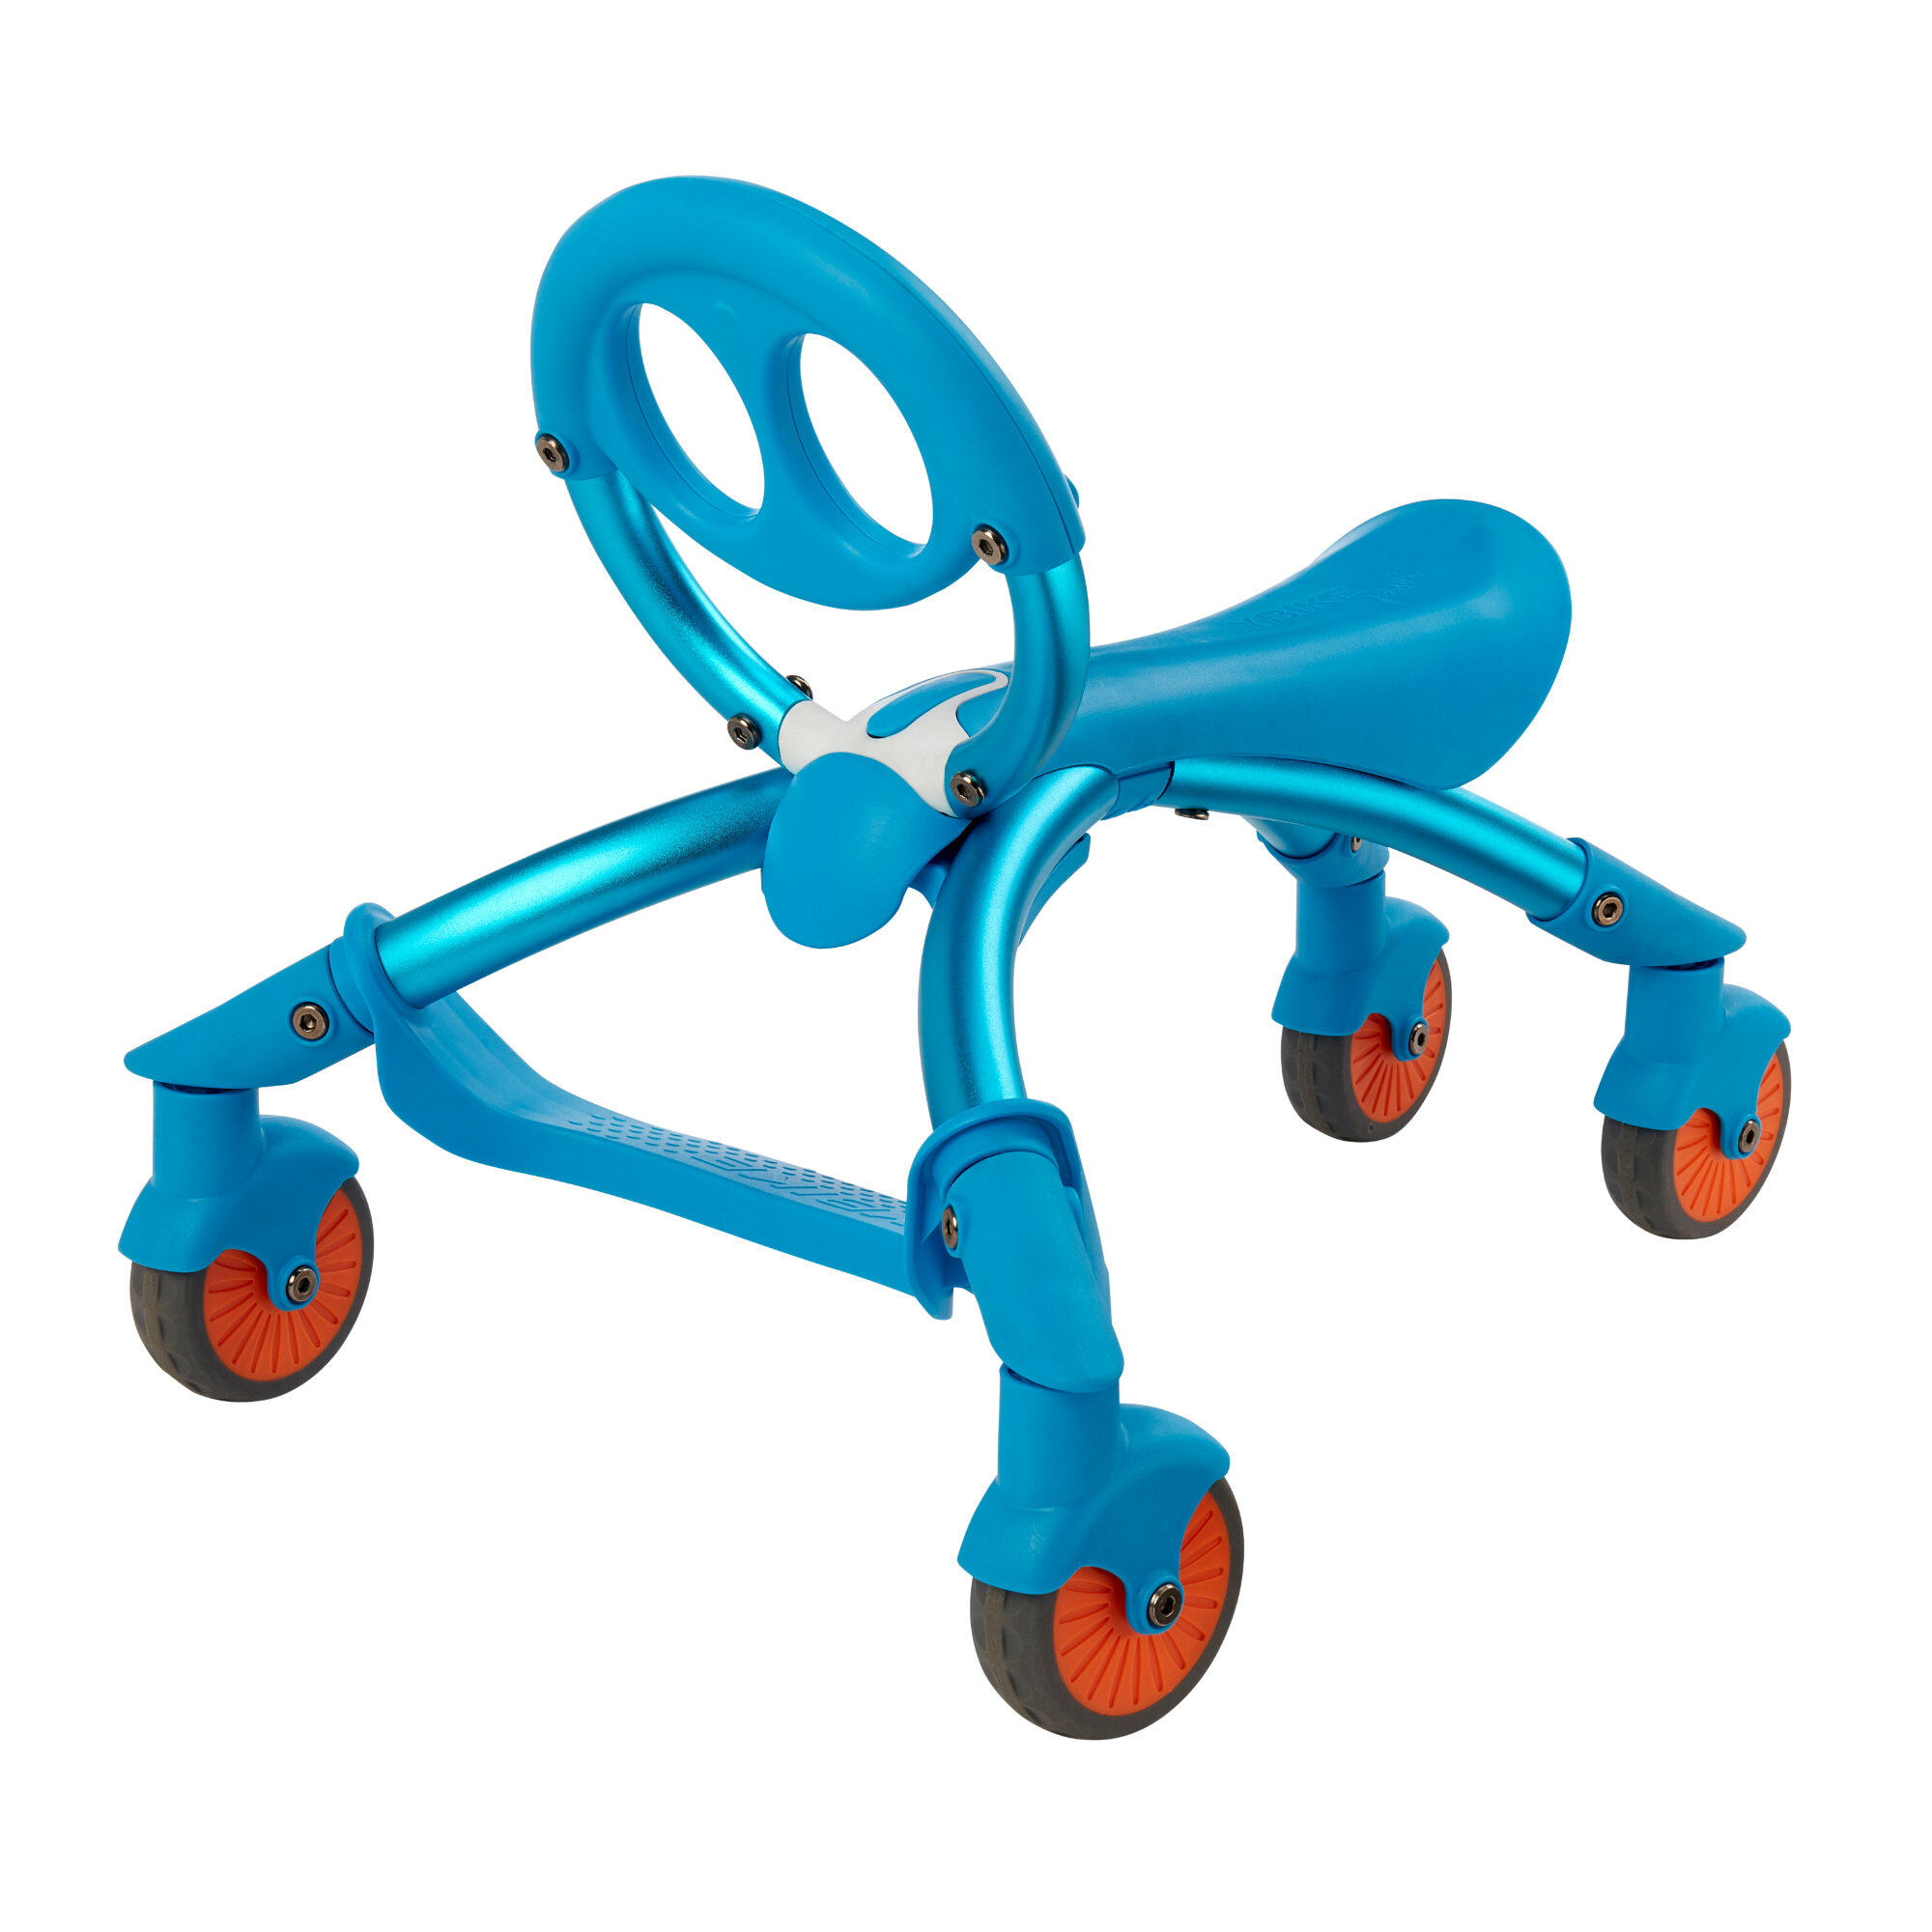 NSG YBIKE Pewi Stoll Walker And Ride-On Toy, Blue - Wayfair Canada